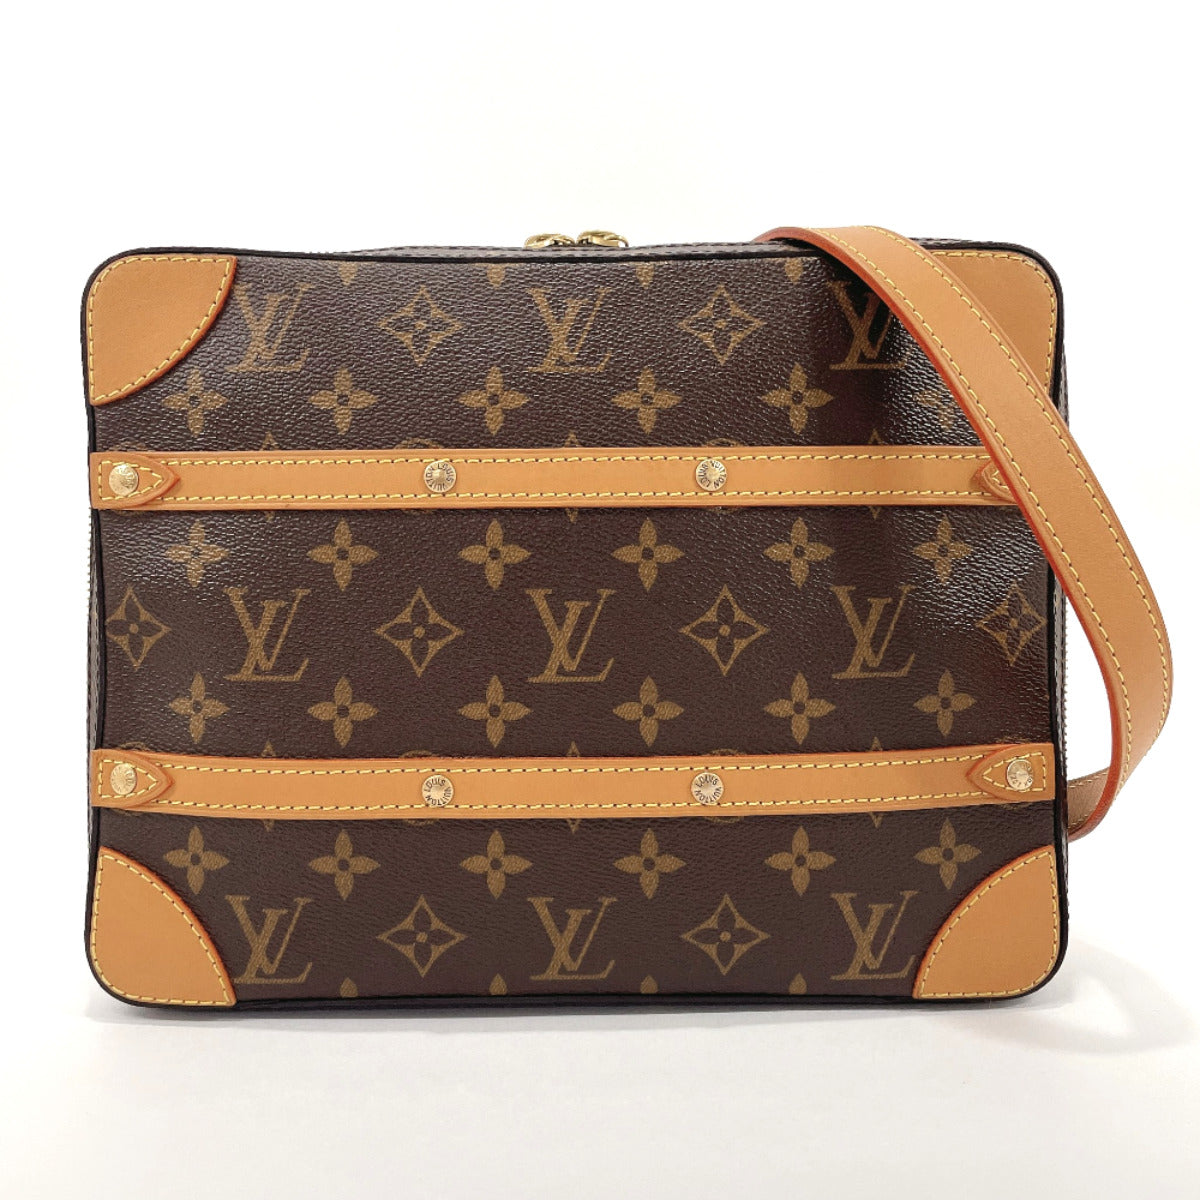 lv soft leather bags